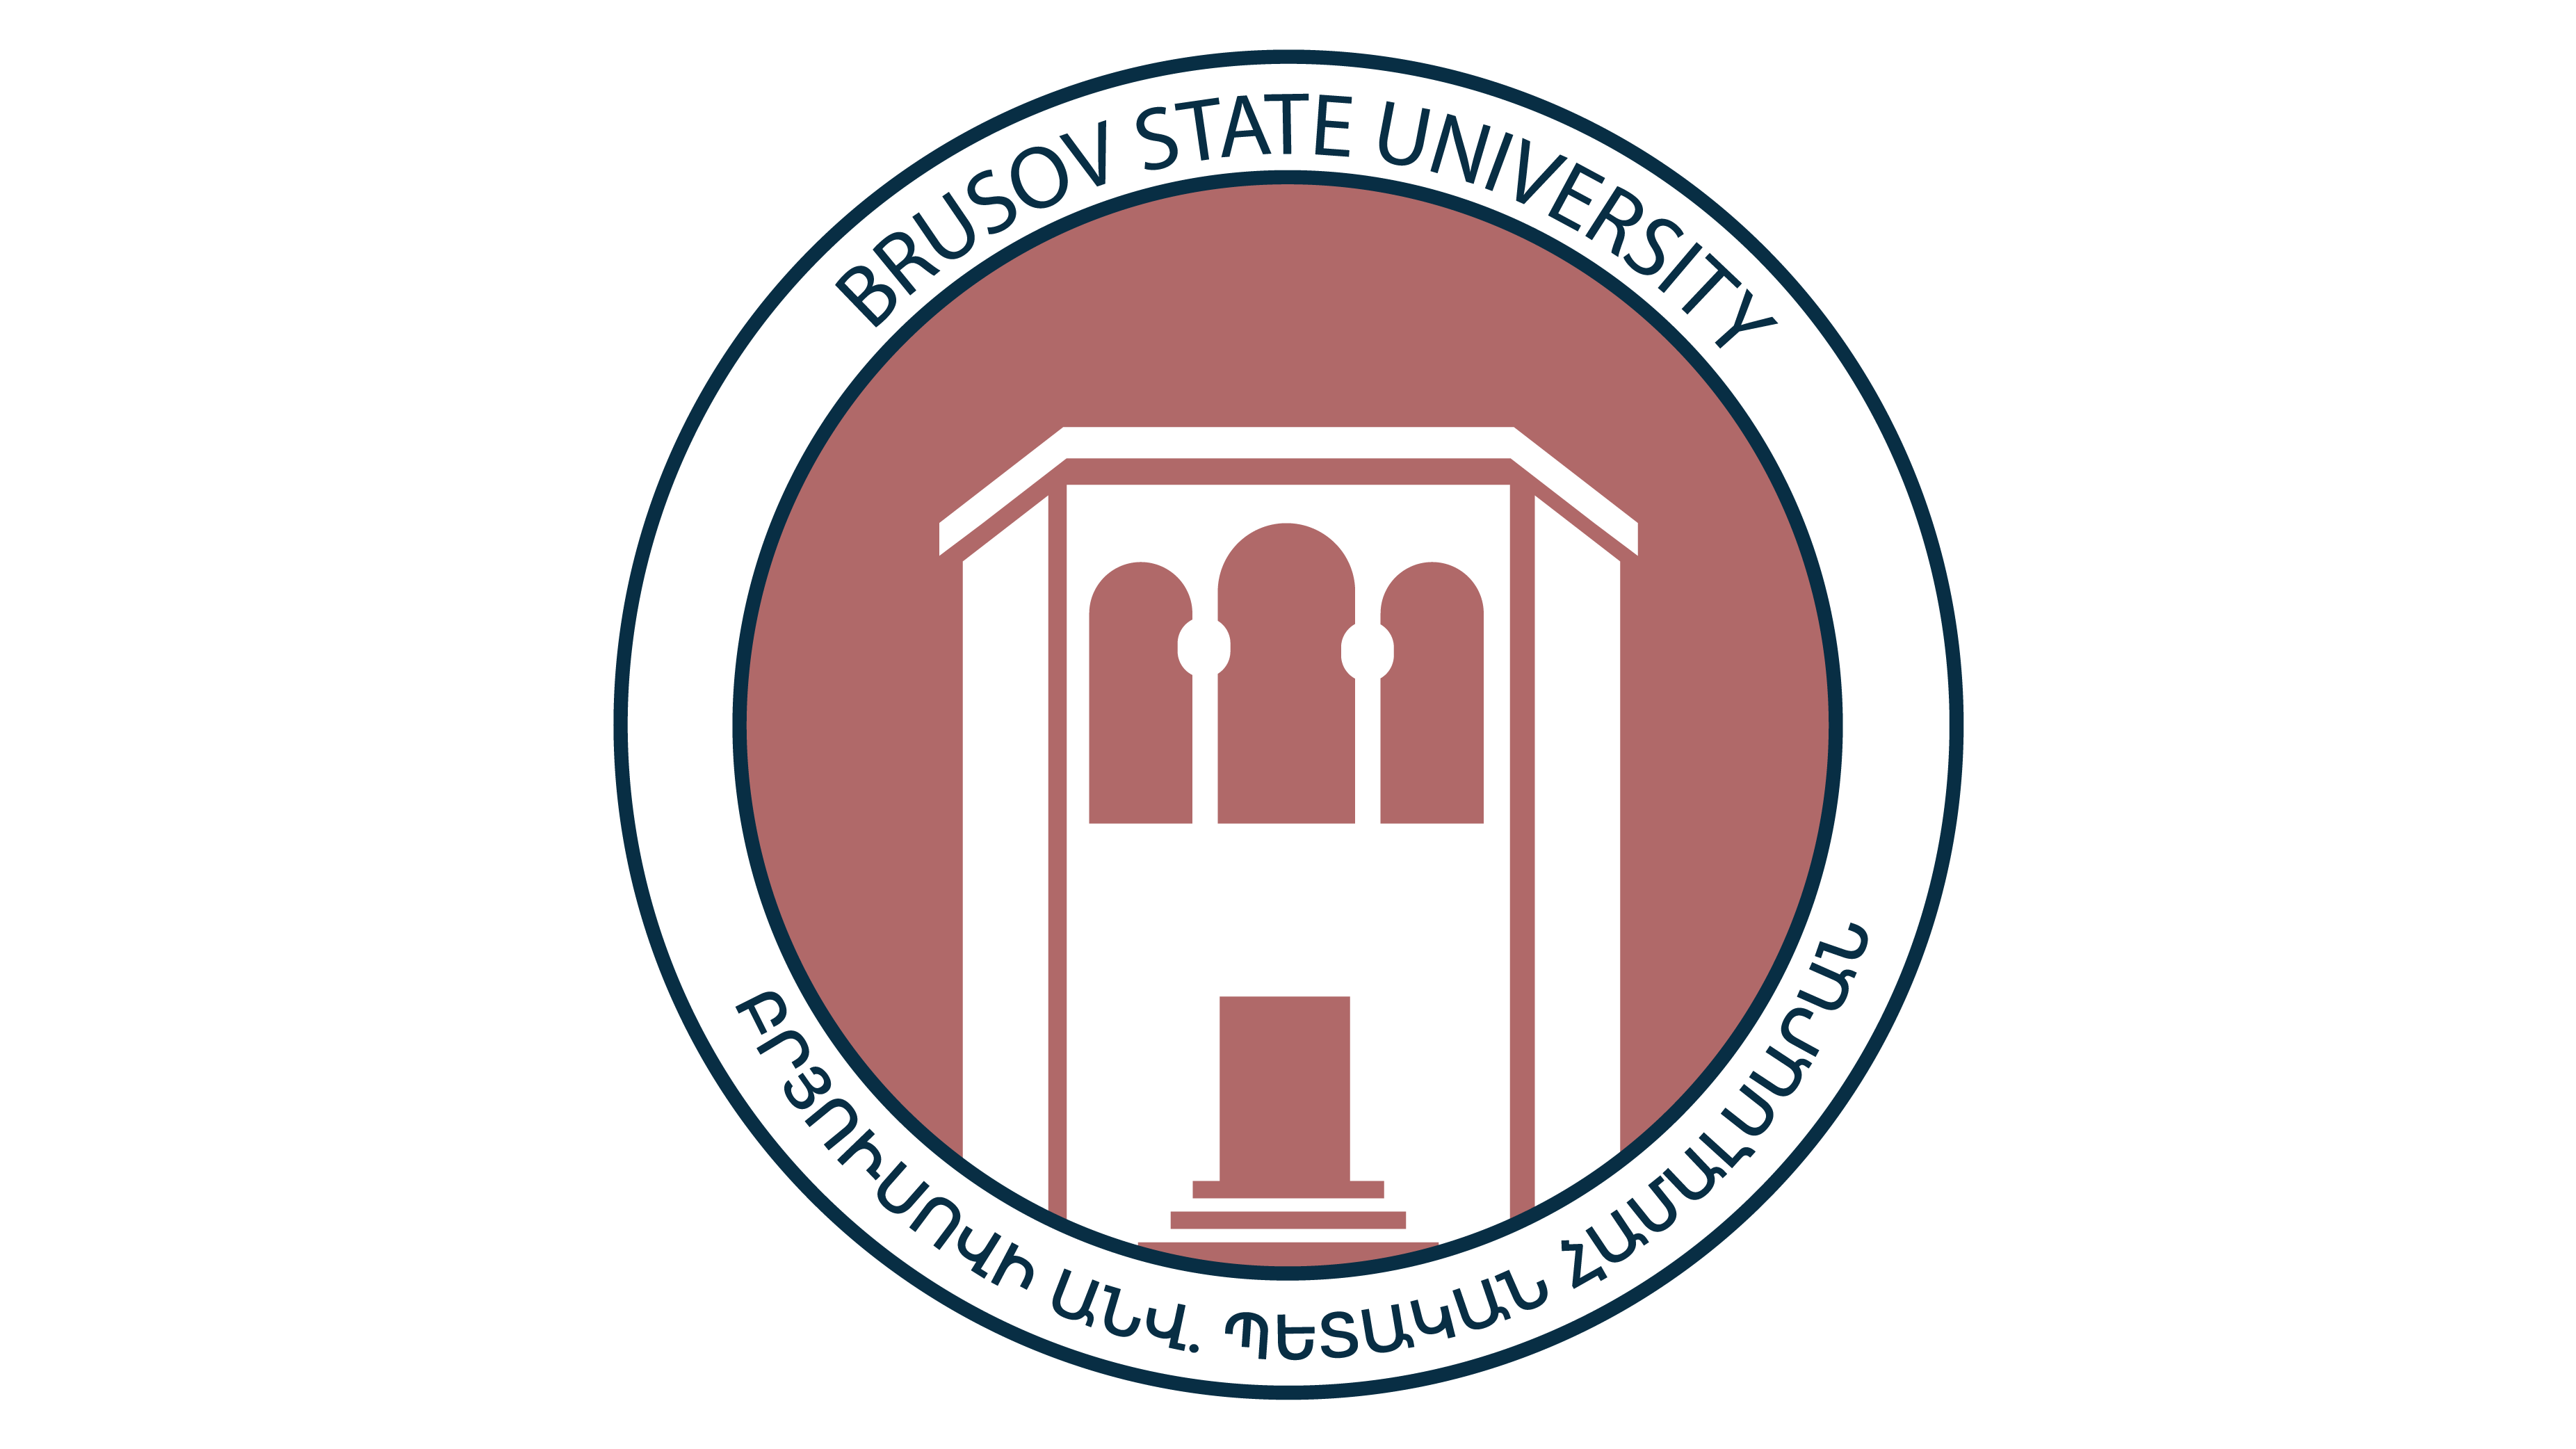 4328-bsulogo16x9.png